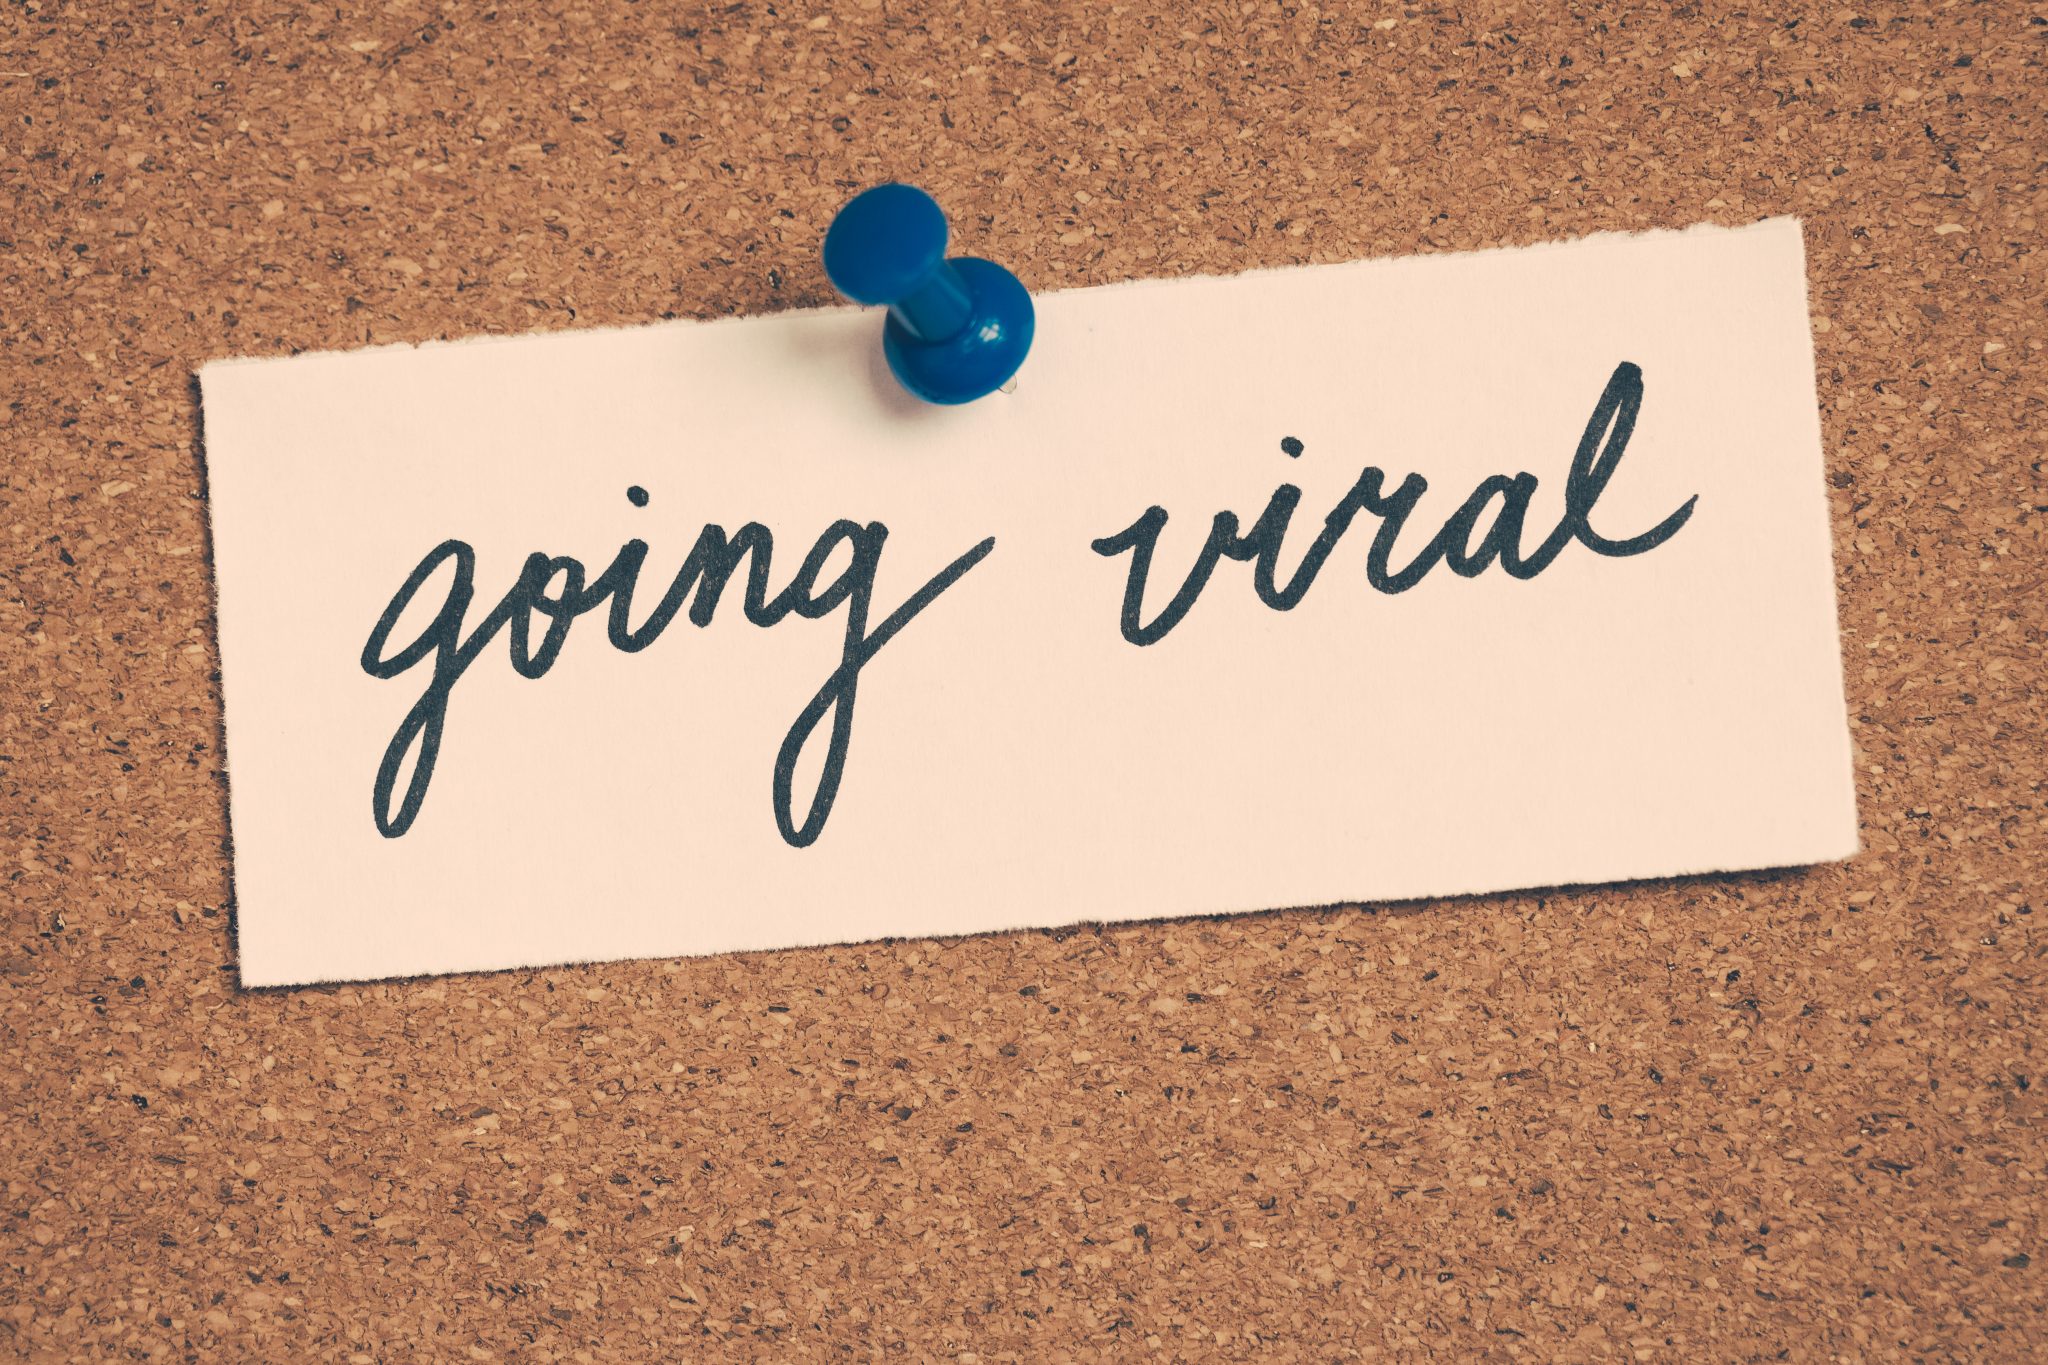 The Science Behind “Going Viral”